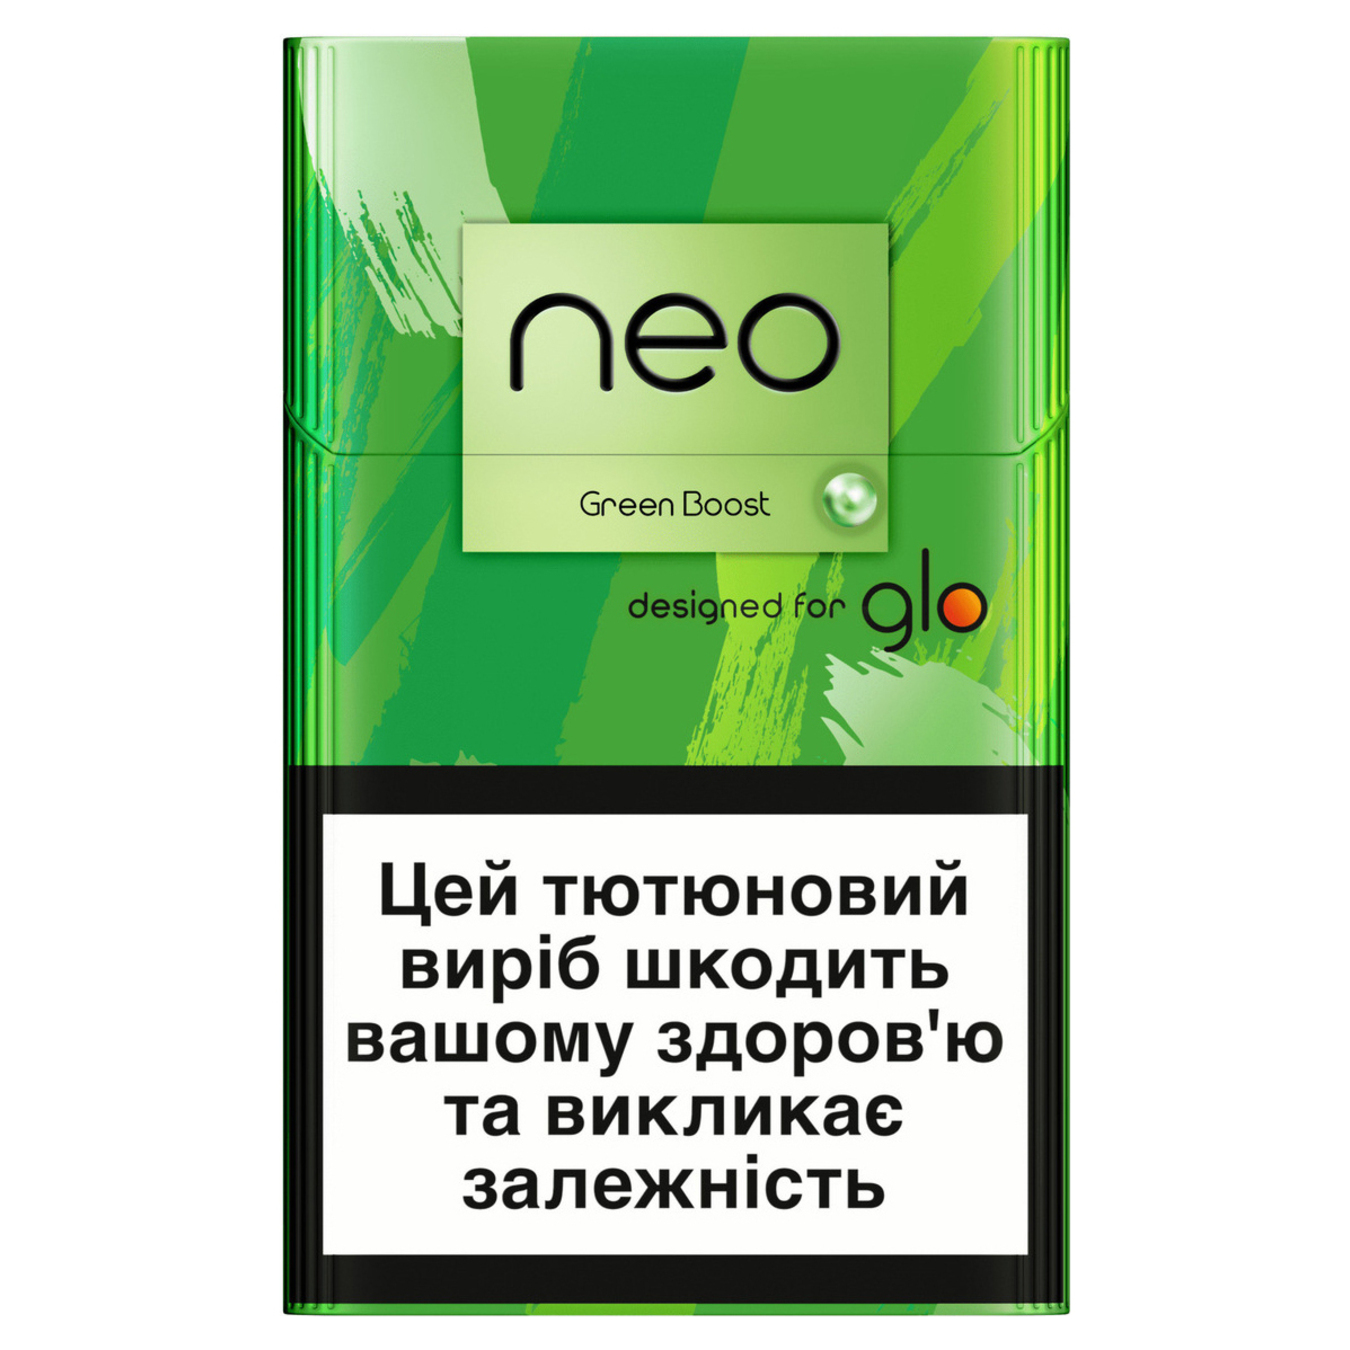 Sticks Neo Demi Green Boost Tobacco 20pcs (the price is without excise tax)